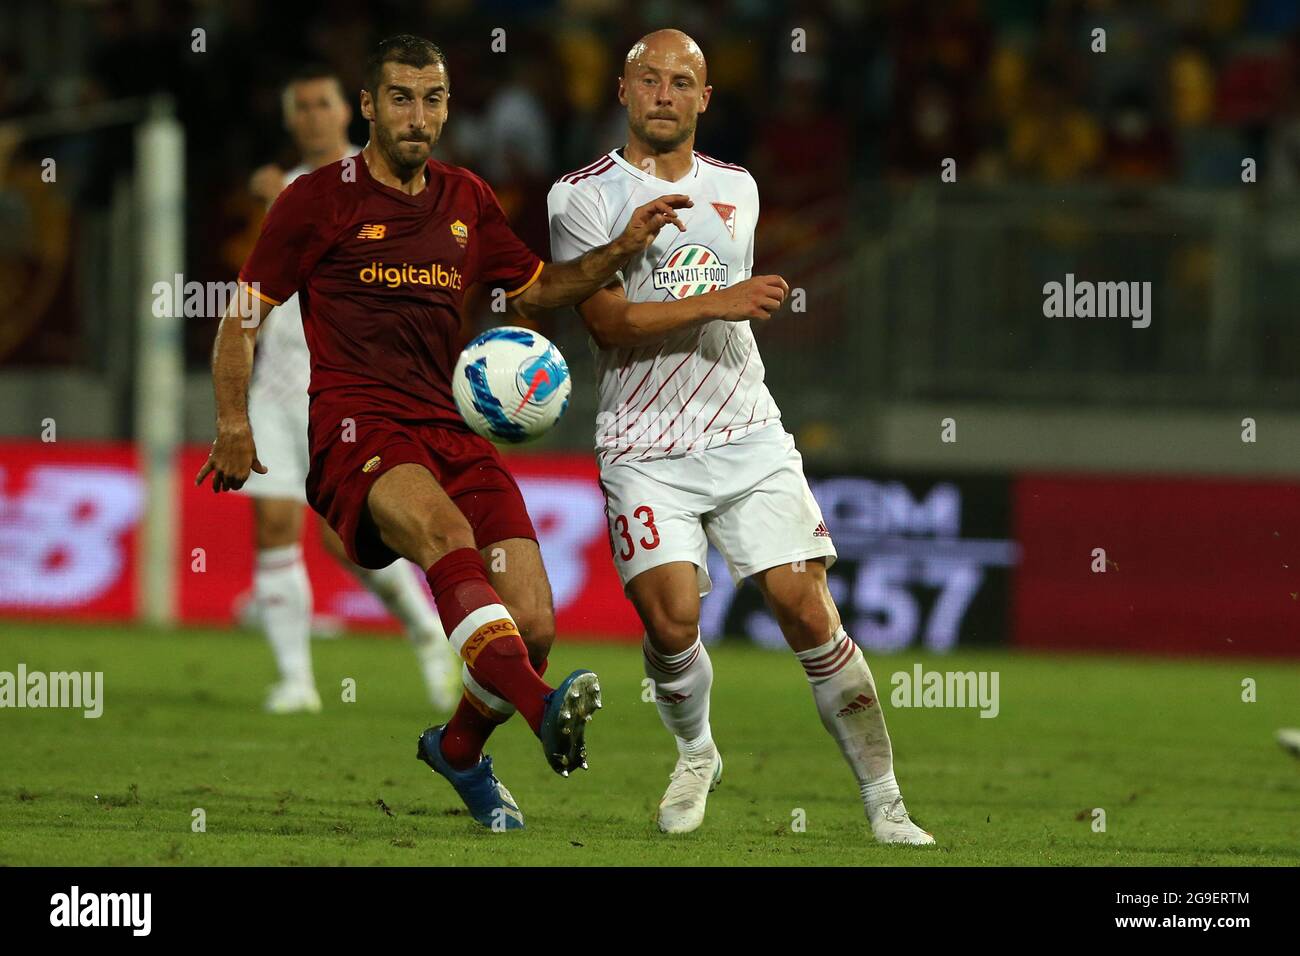 Frosinone, Italy. 25th July, 2021. Frosinone, Italy July 25 2021. Henrix Mkhitaryan (Roma) and Jozsef Varga (Debrecen) compete for the ball during the friendly match between AS Roma and DVSC at Stadio Benito Stirpe. (Photo by Giuseppe Fama/Pacific Press/Sipa USA) Credit: Sipa USA/Alamy Live News Stock Photo